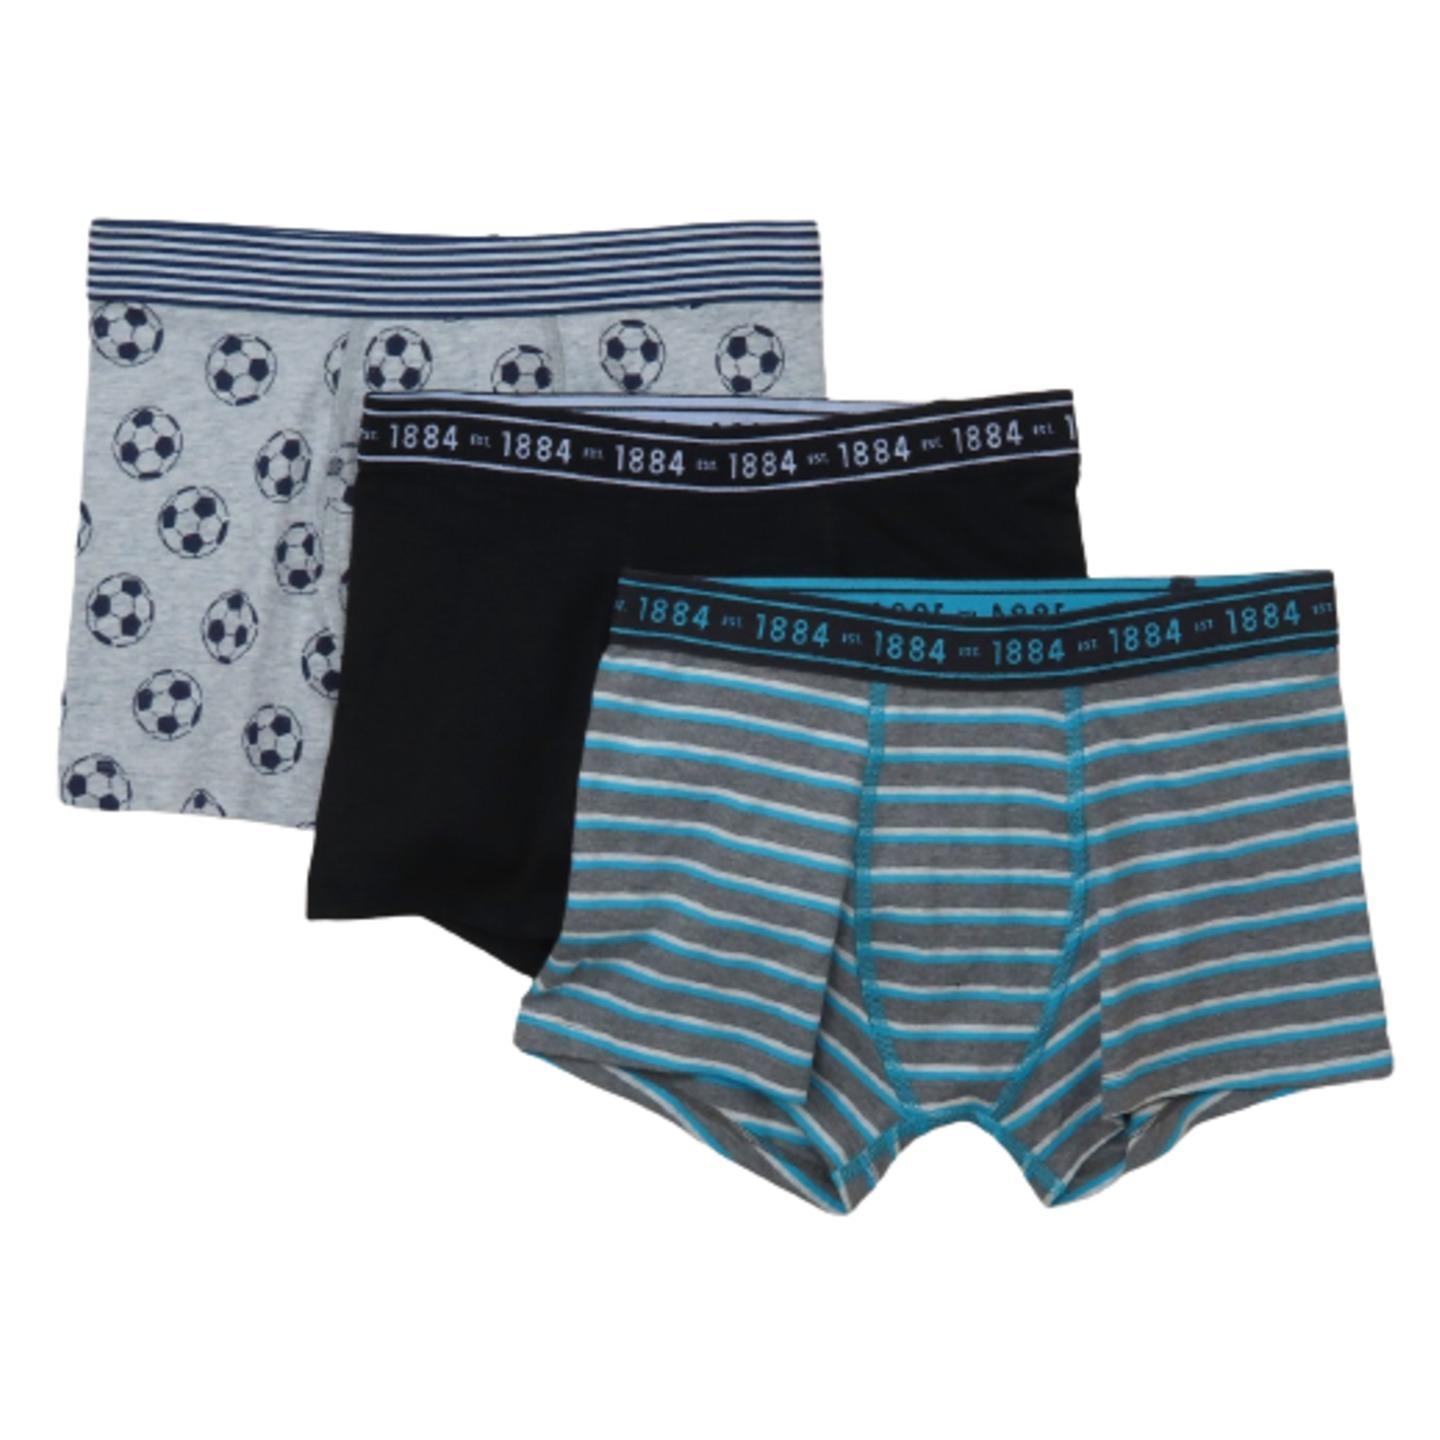 M&S BOYS 3 PACK BOXERS